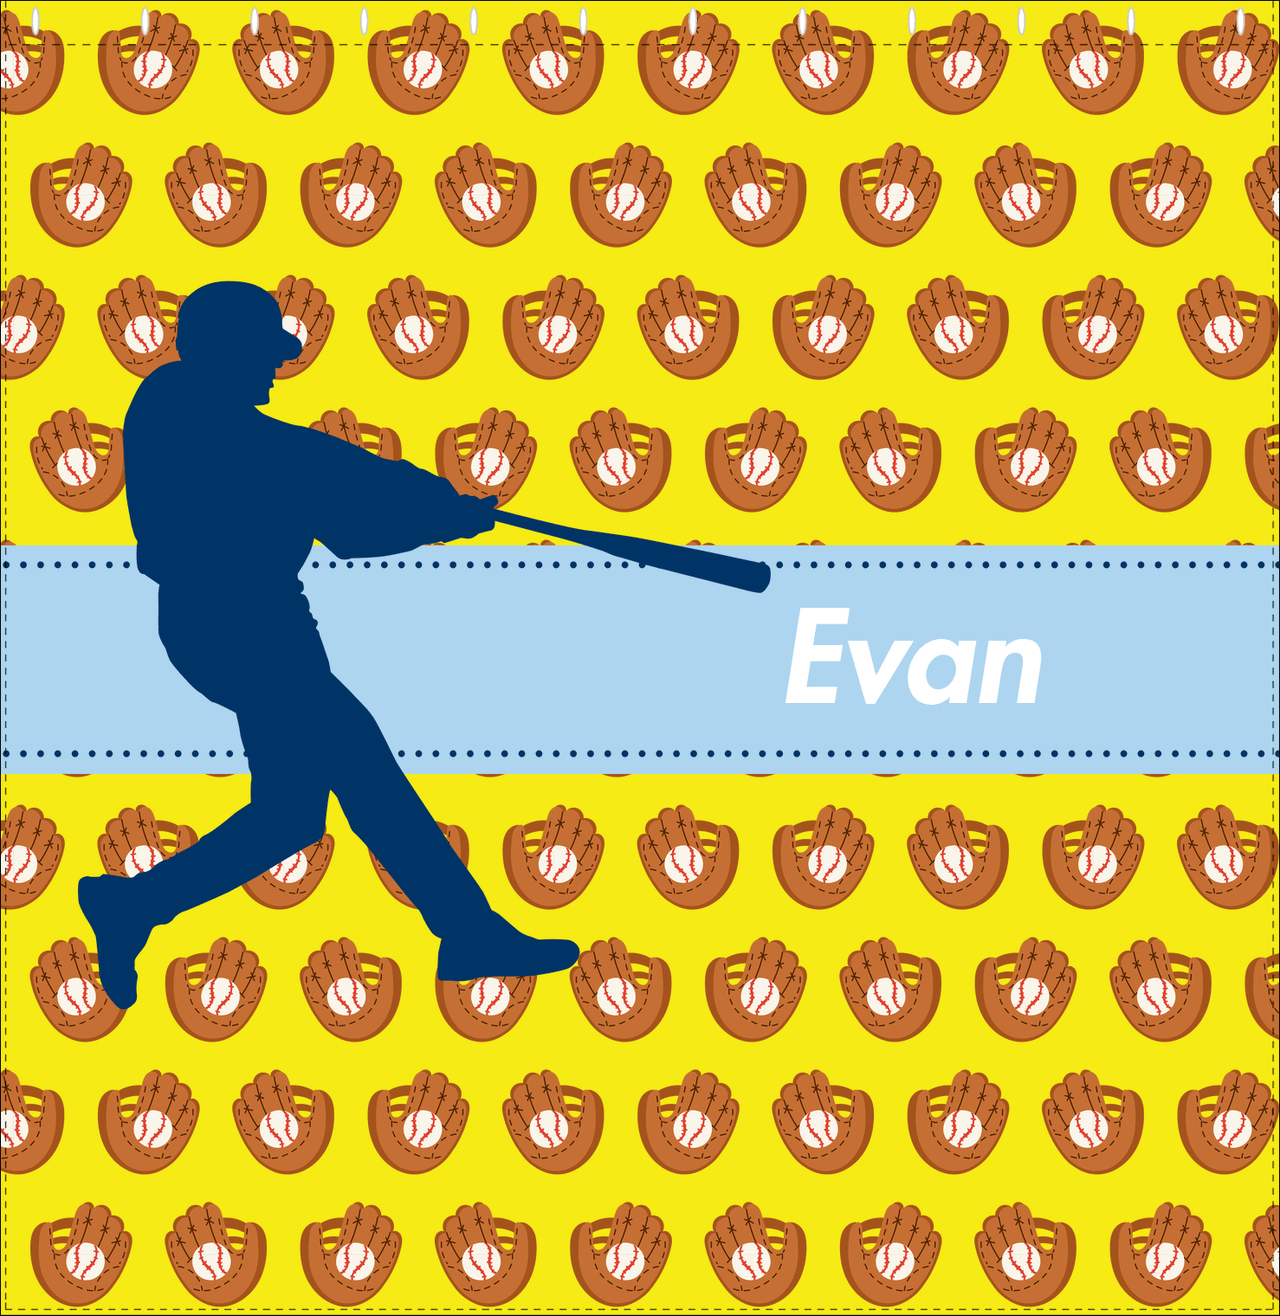 Personalized Baseball Shower Curtain XLI - Yellow Background - Silhouette VI - Decorate View